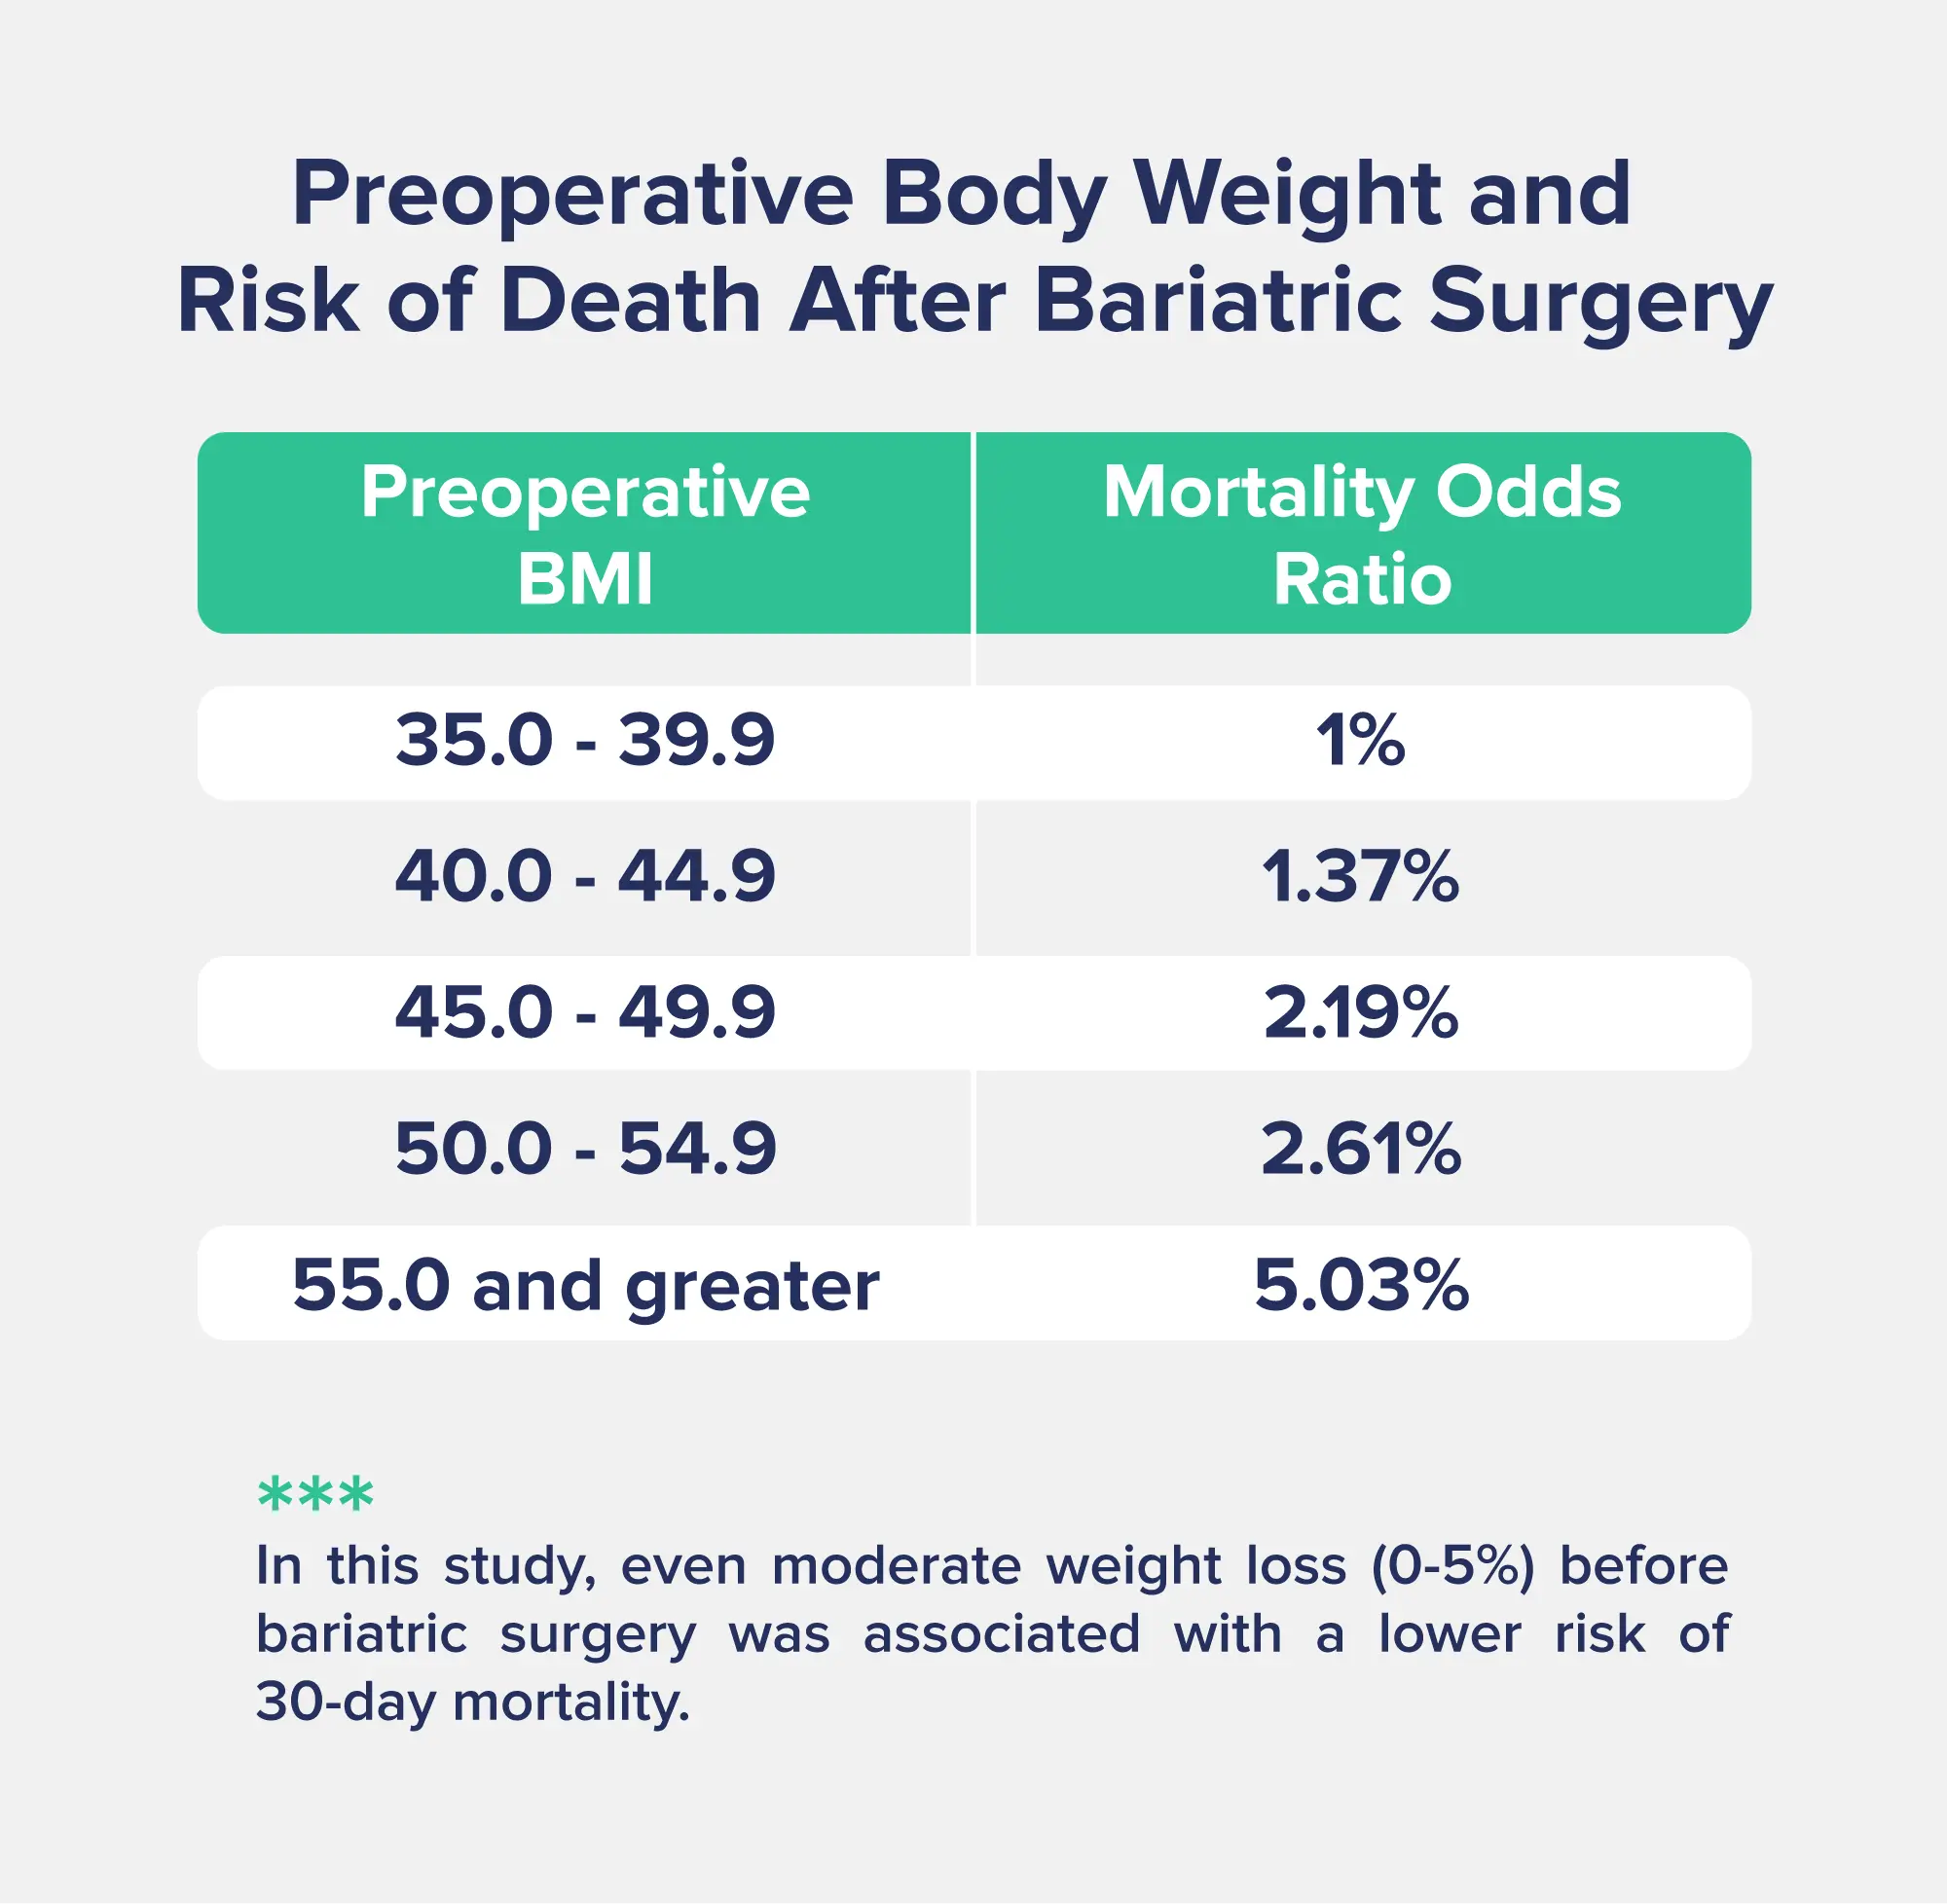 A graphic entitled "Preoperative Body Weight and Risk of Death After Bariatric Surgery" depicting a two-column table that correlates these two values (BMI range in one column, corresponding mortality ratio in the other)